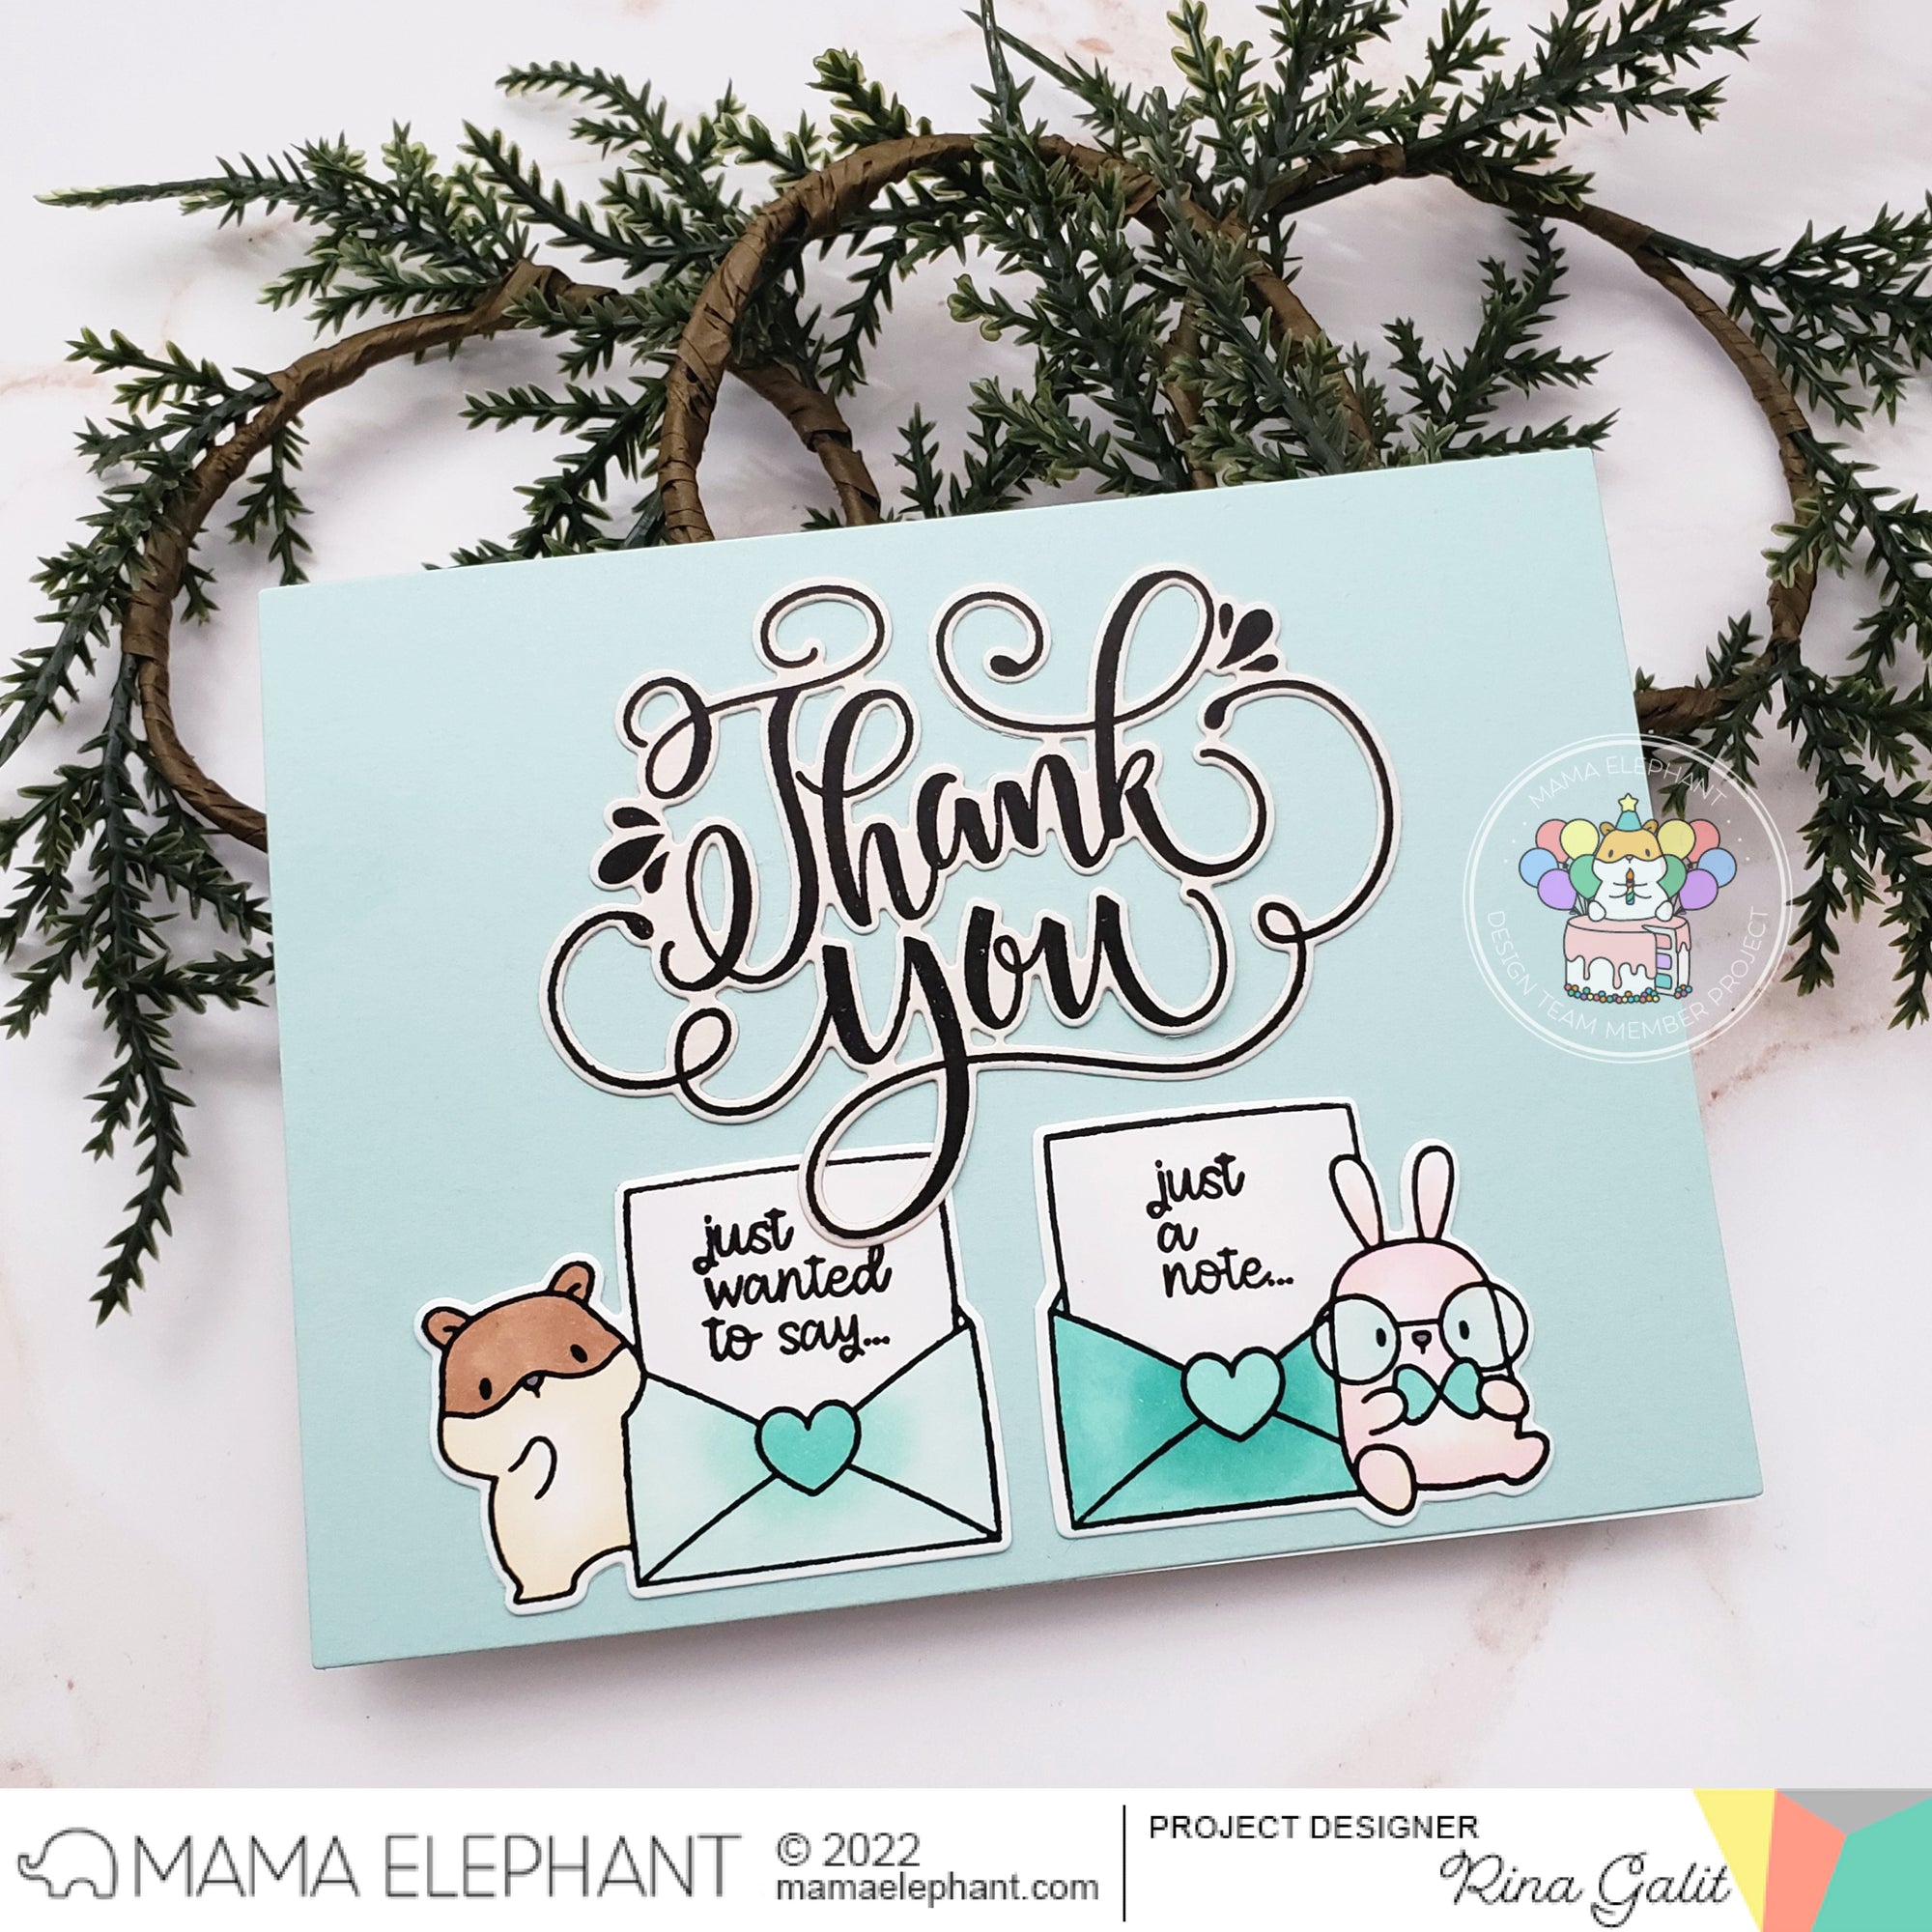 INTRODUCING: Little Agenda Postage & Thank You Wishes